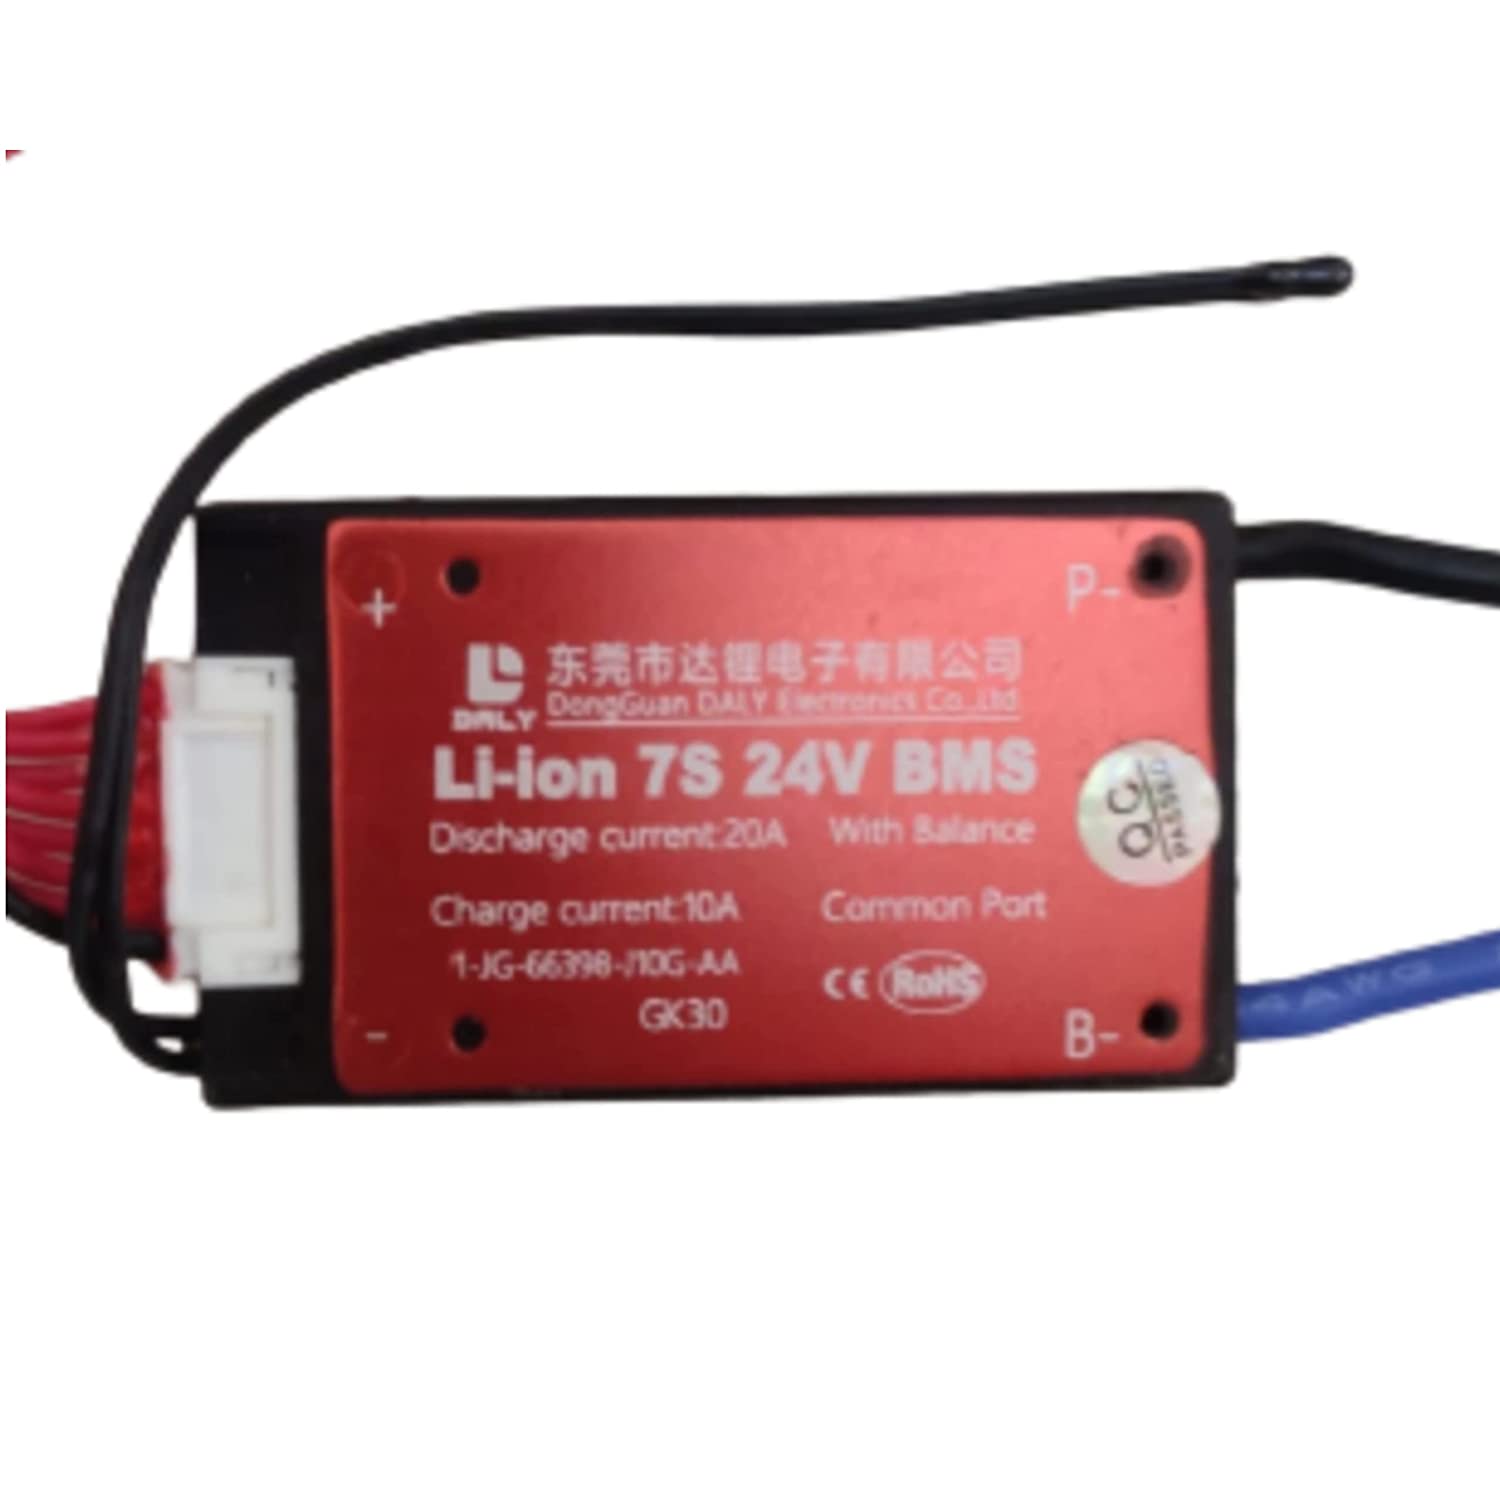 BMS 7S 24V 20A for Lithium Ion Battery (Waterproof & Heat Resistant Wire)